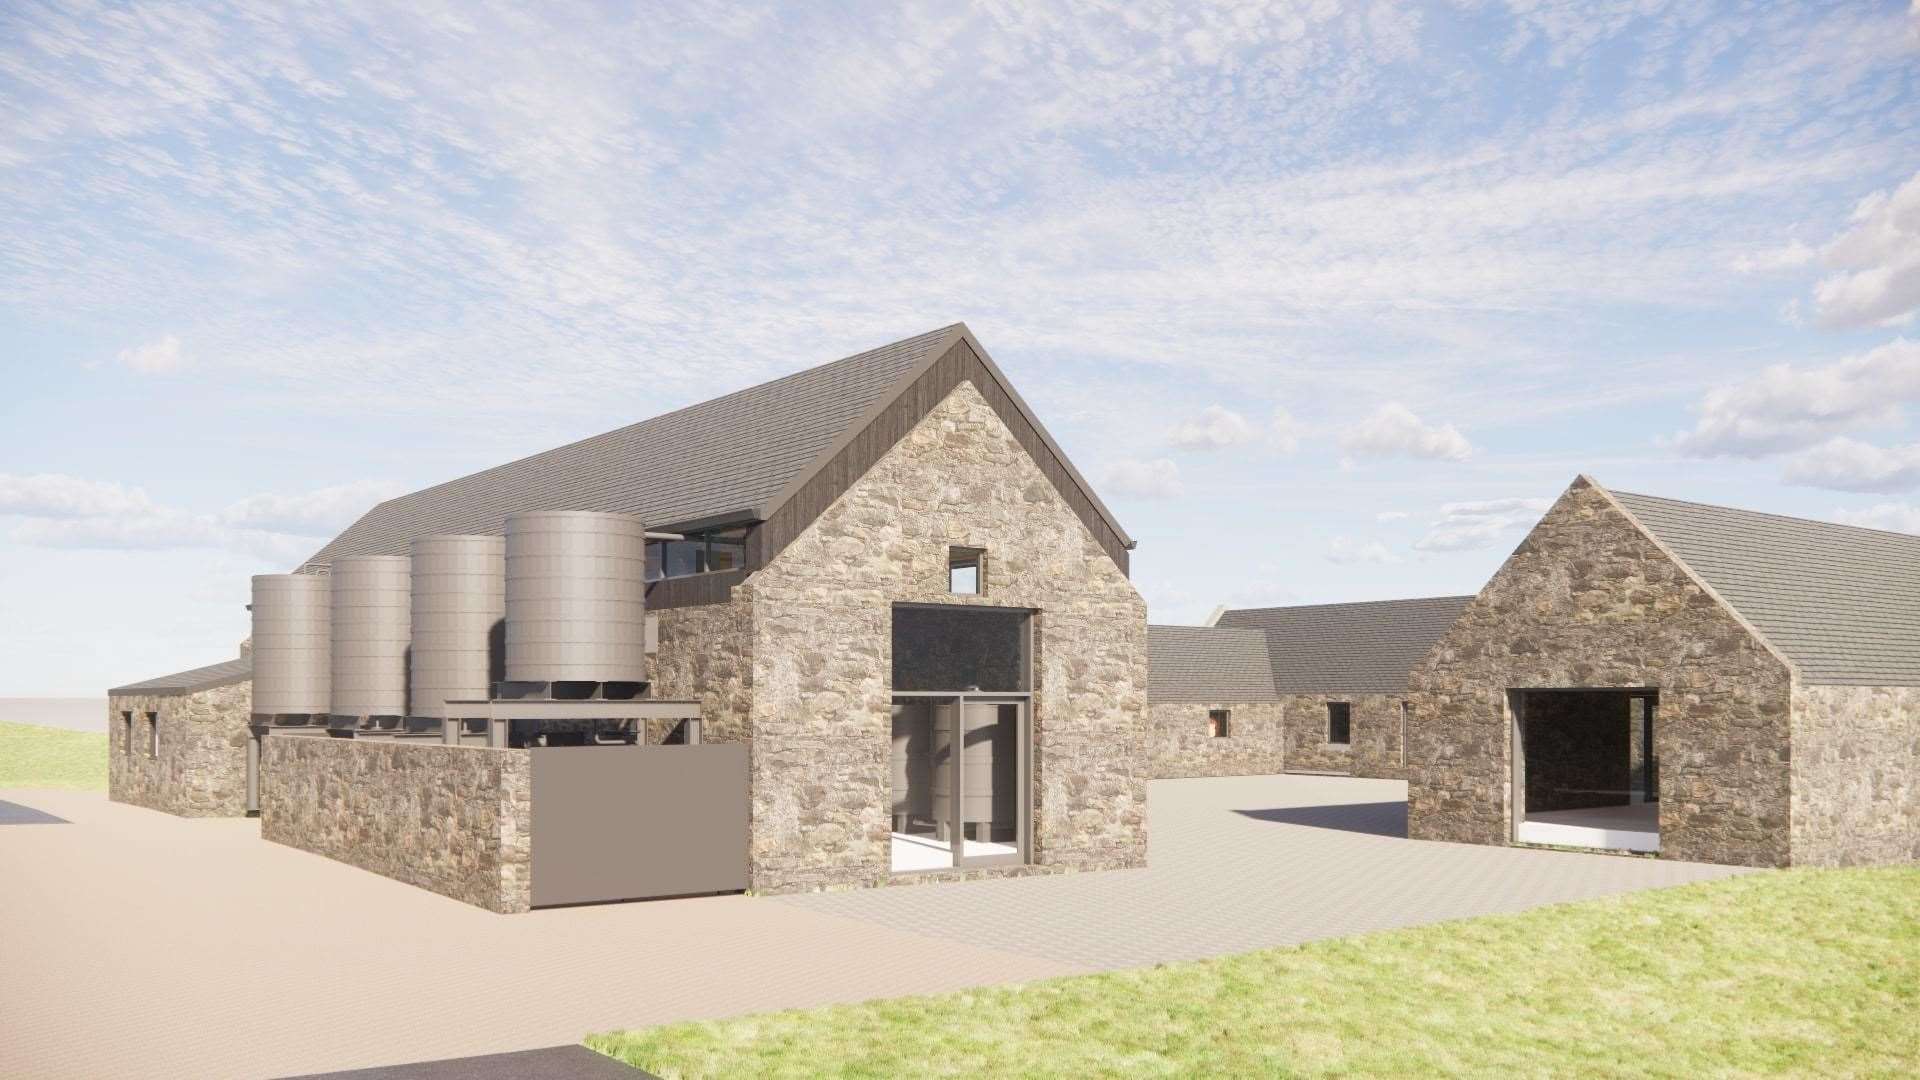 Another impression of The Cabrach Distillery and Heritage Centre.